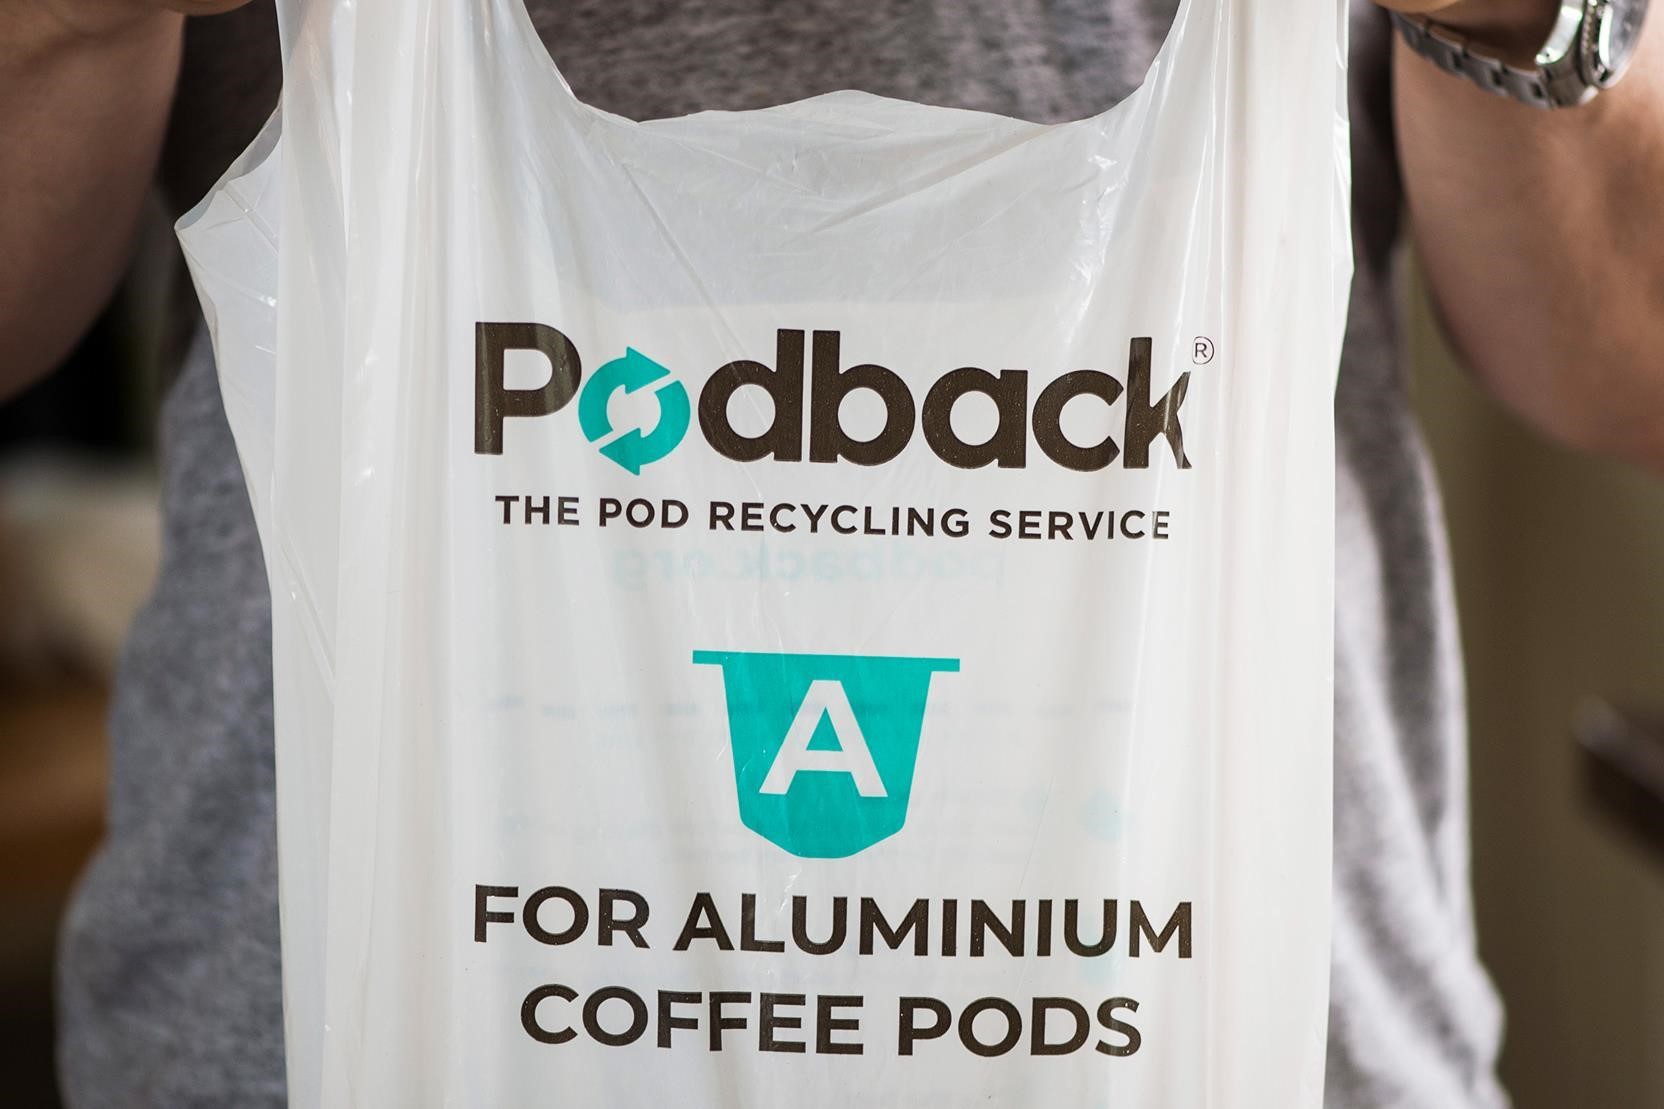 Wolverhampton Council gains Podback’s trust for aluminium and plastic waste recycling